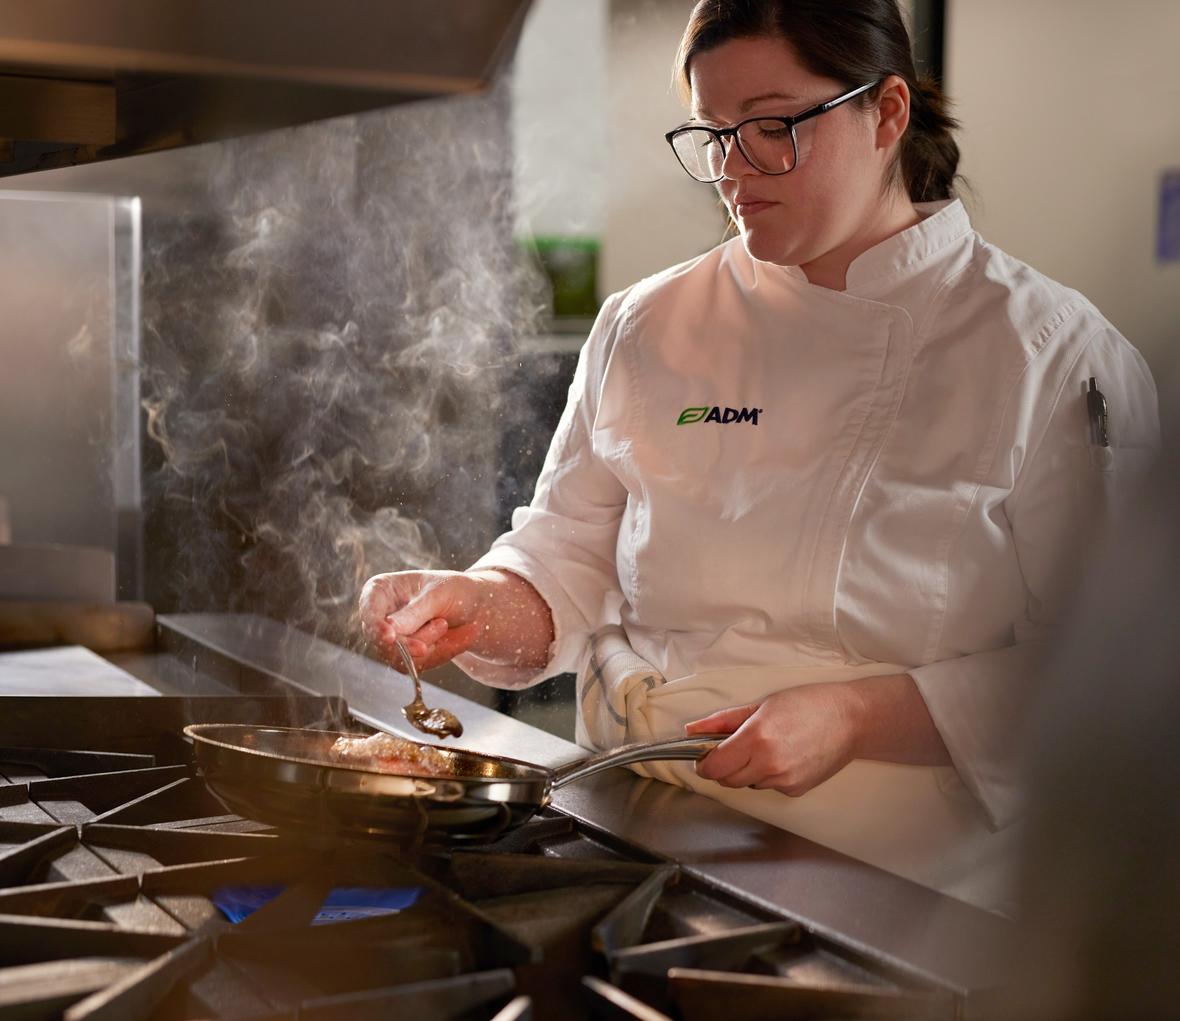 Female chef wearing white ADM coat cooking with frying pan on stove in culinary kitchen